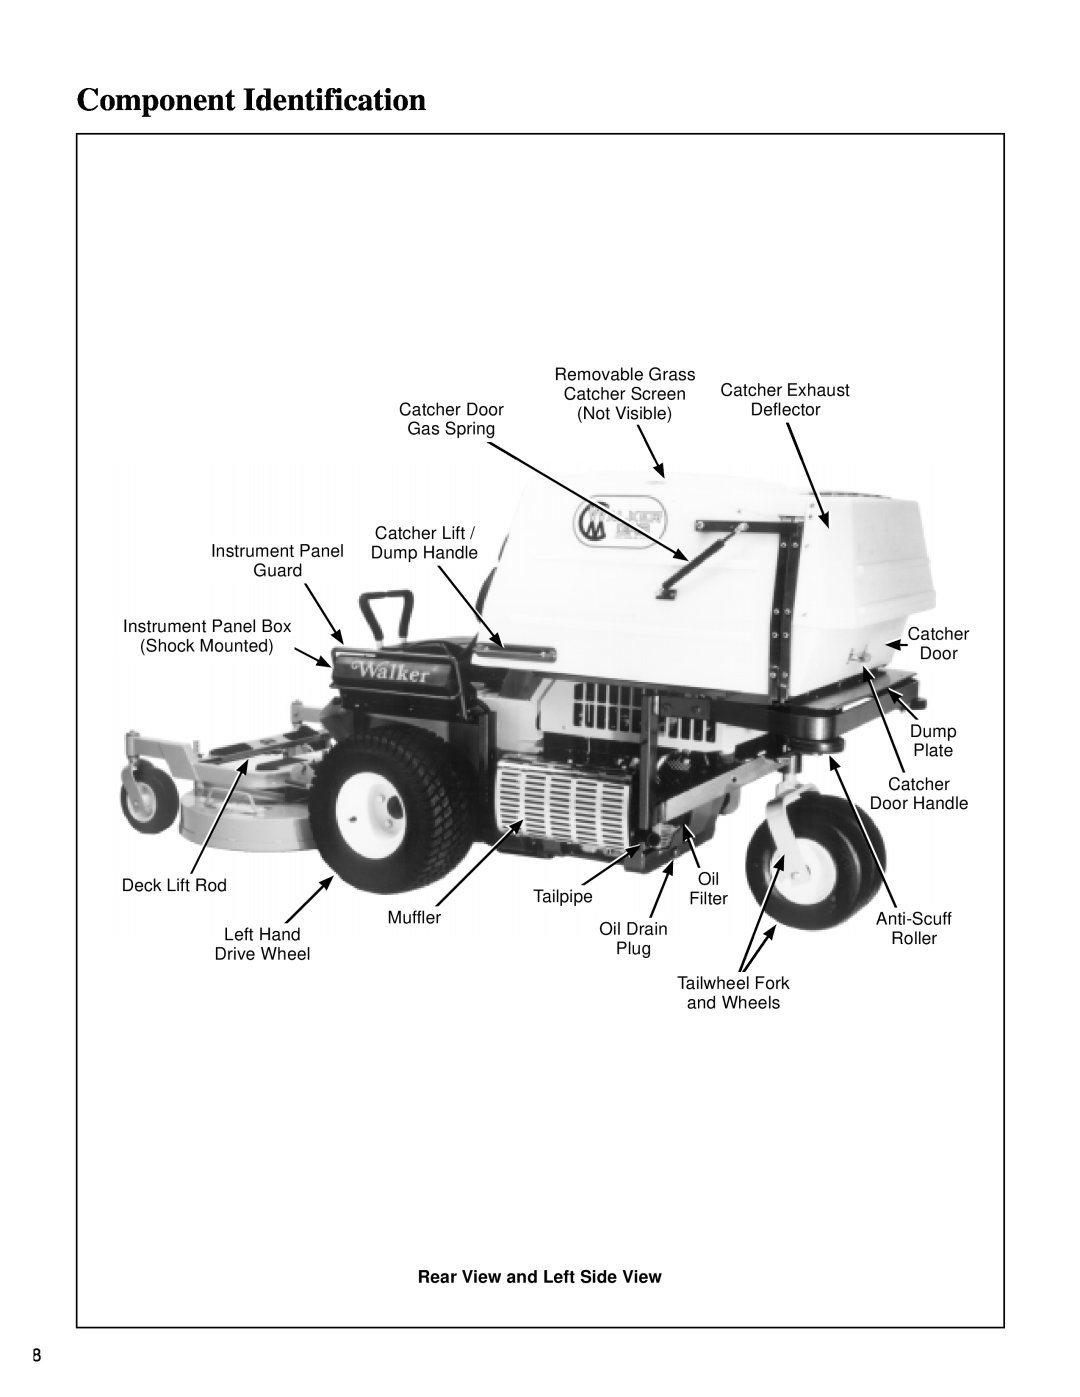 Walker MT owner manual Component Identification, Rear View and Left Side View 